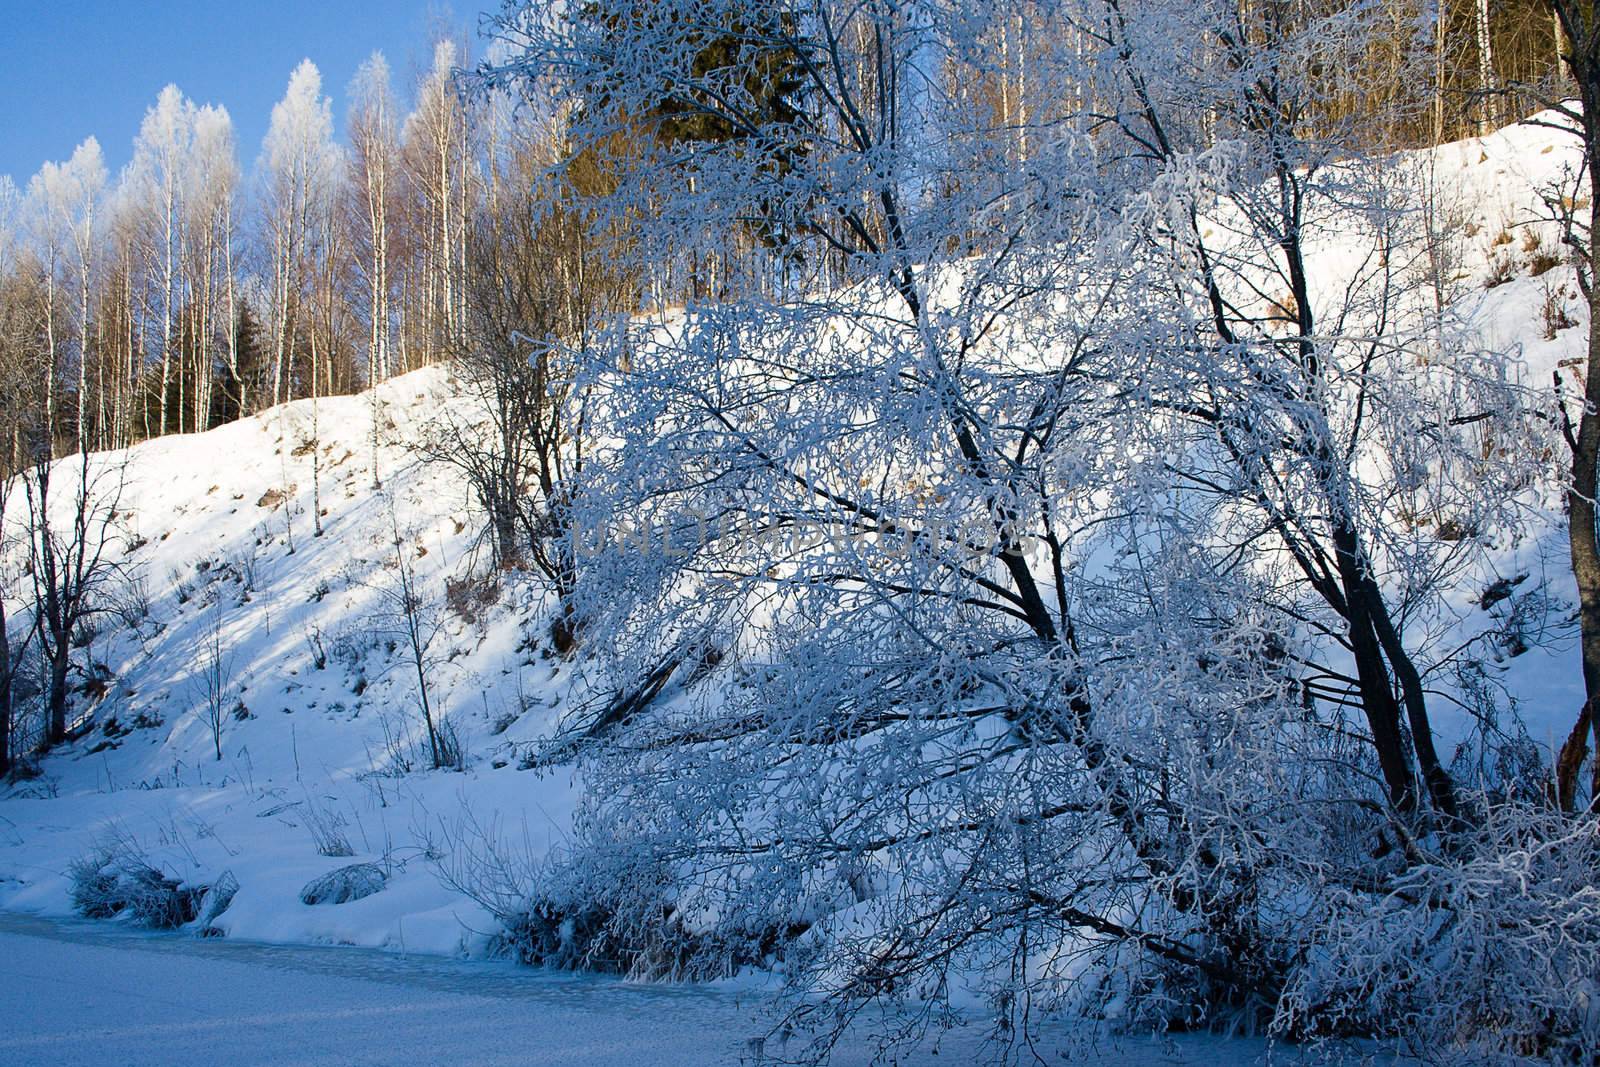 Winter, cold evening after new year (1 January).
Landscape. The frozen river and icicles on tree branches.
Blue tone.